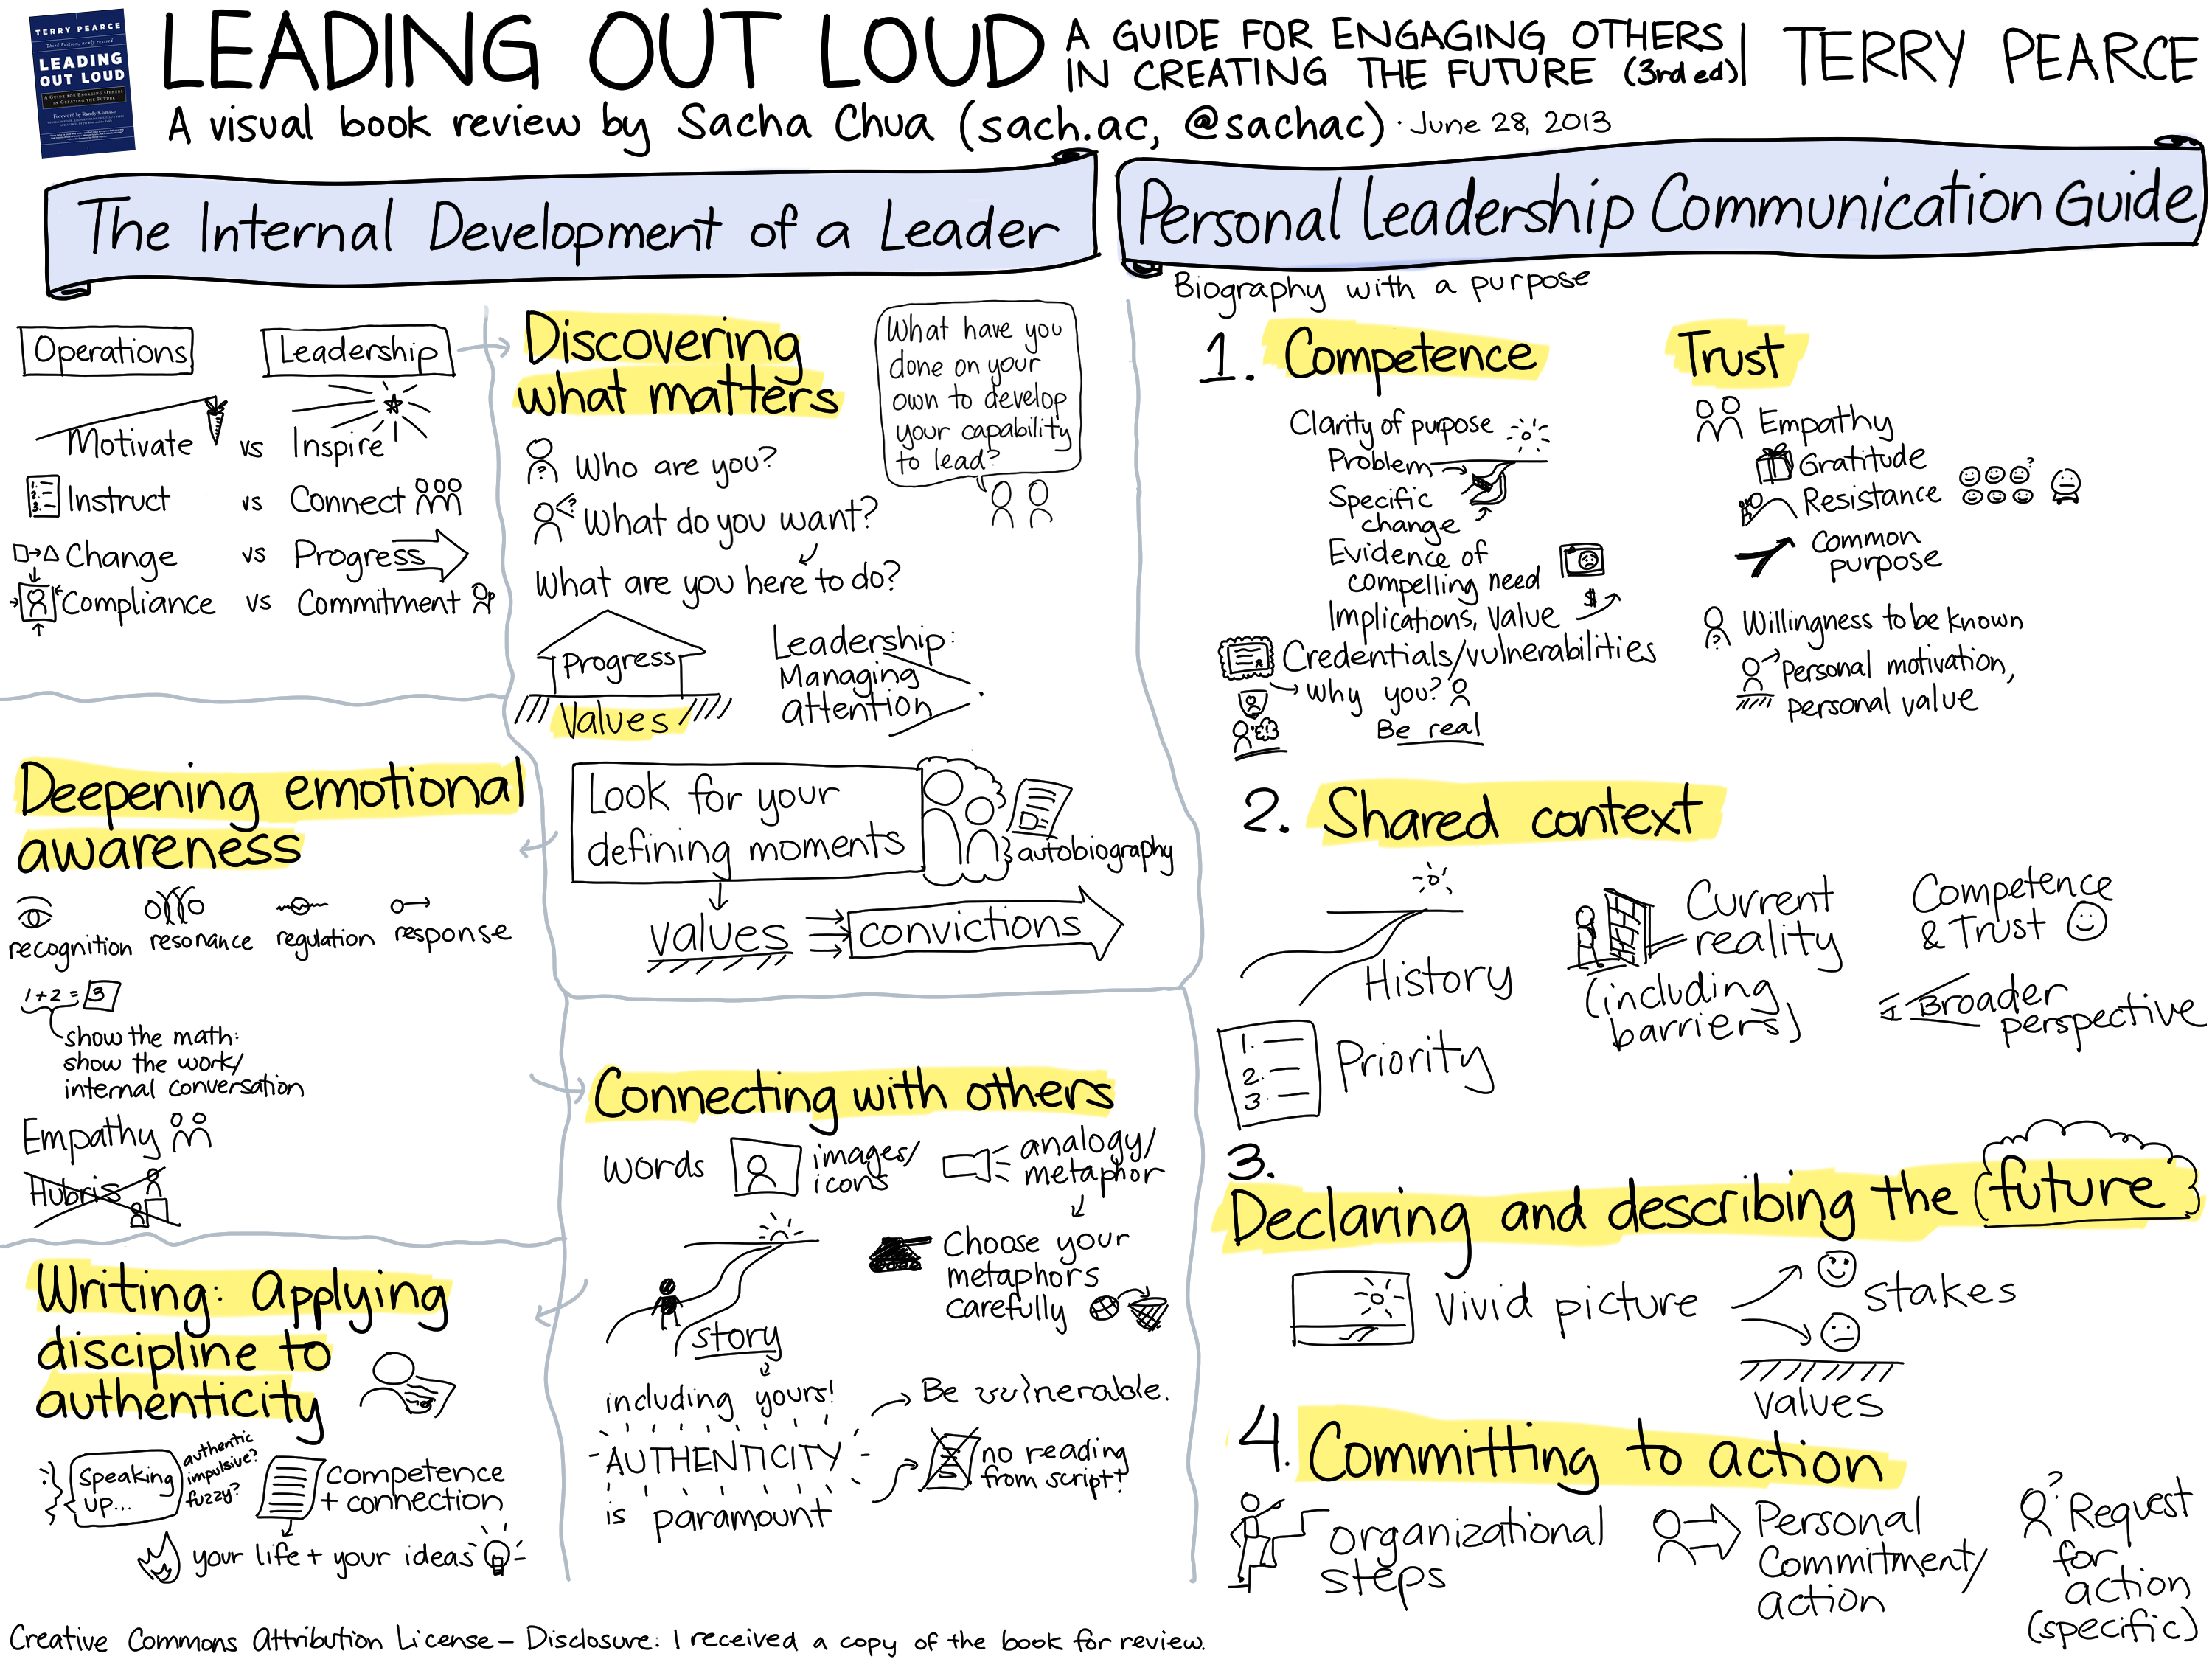 2013-06-28 Book - Leading Out Loud - Terry Pearce